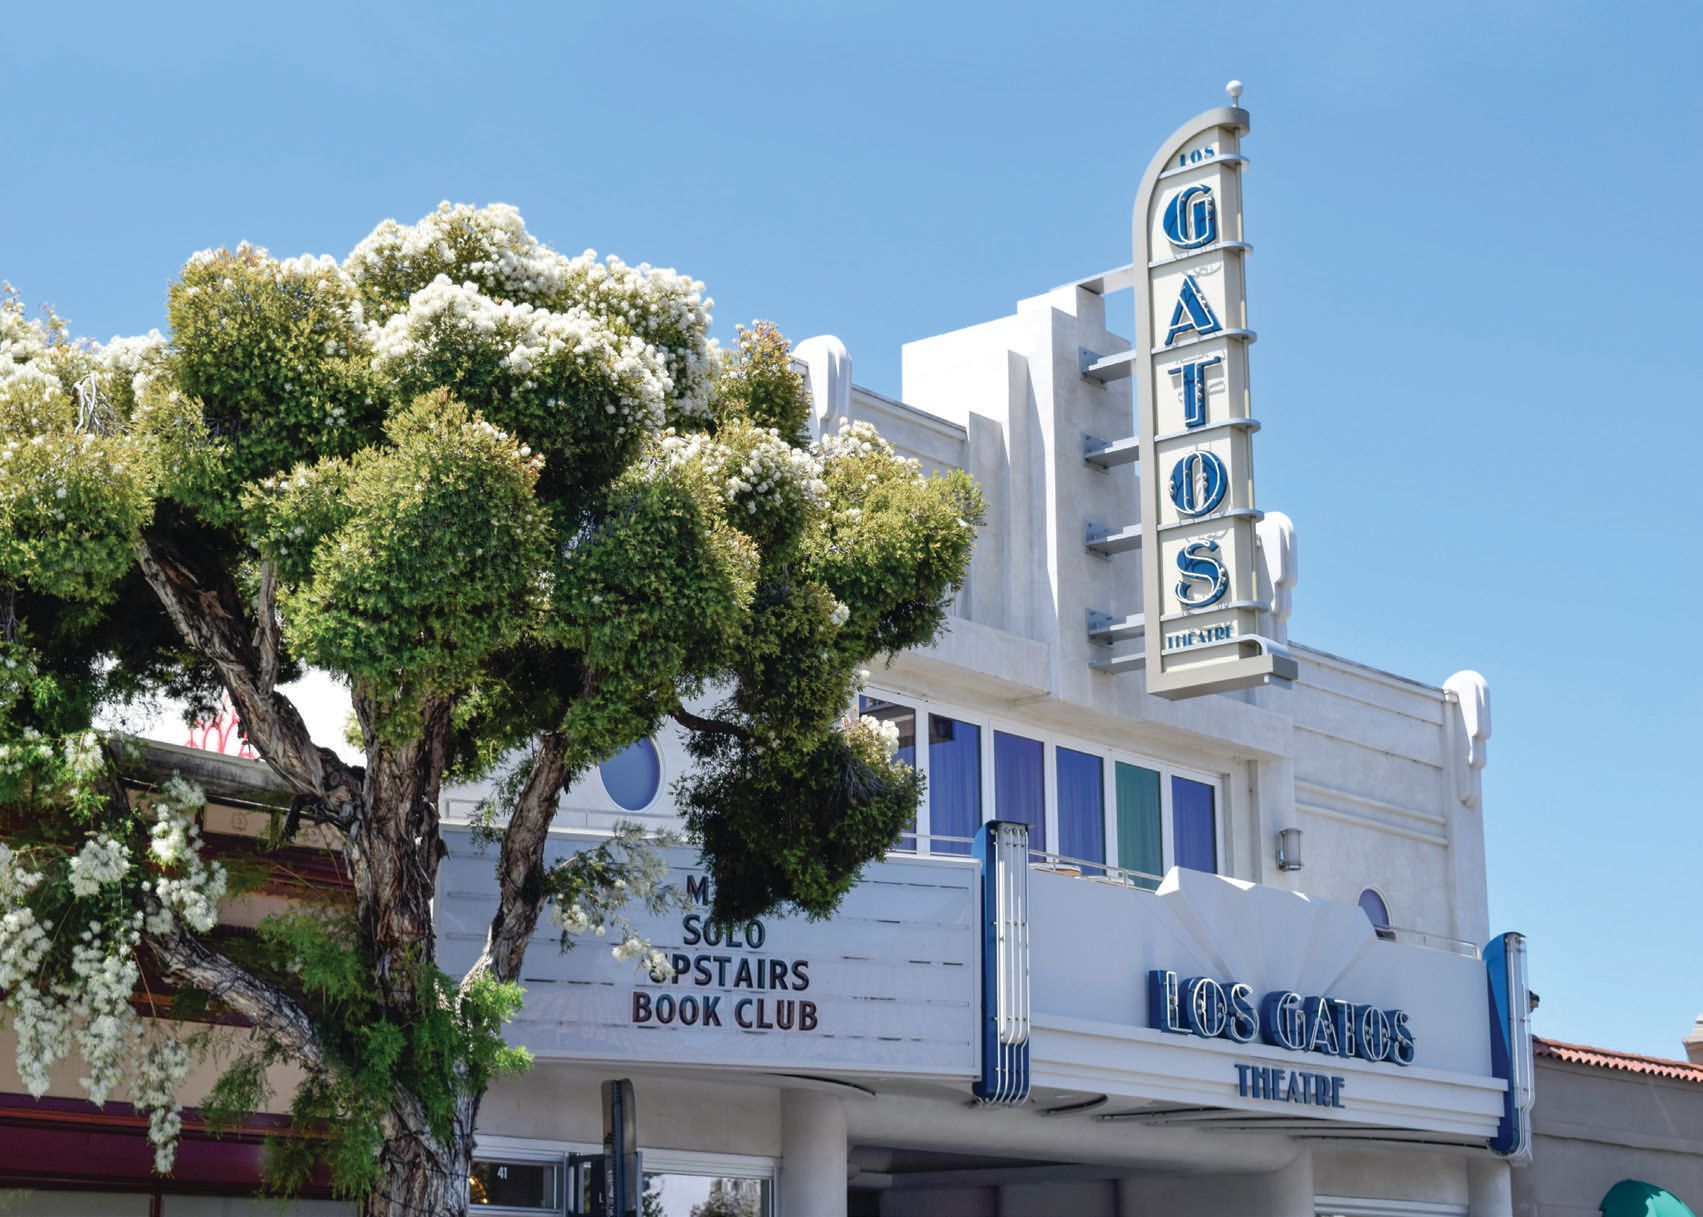 The historic Los Gatos Theatre downtown PHOTO COURTESY OF THE LOS GATOS CHAMBER OF COMMERCE